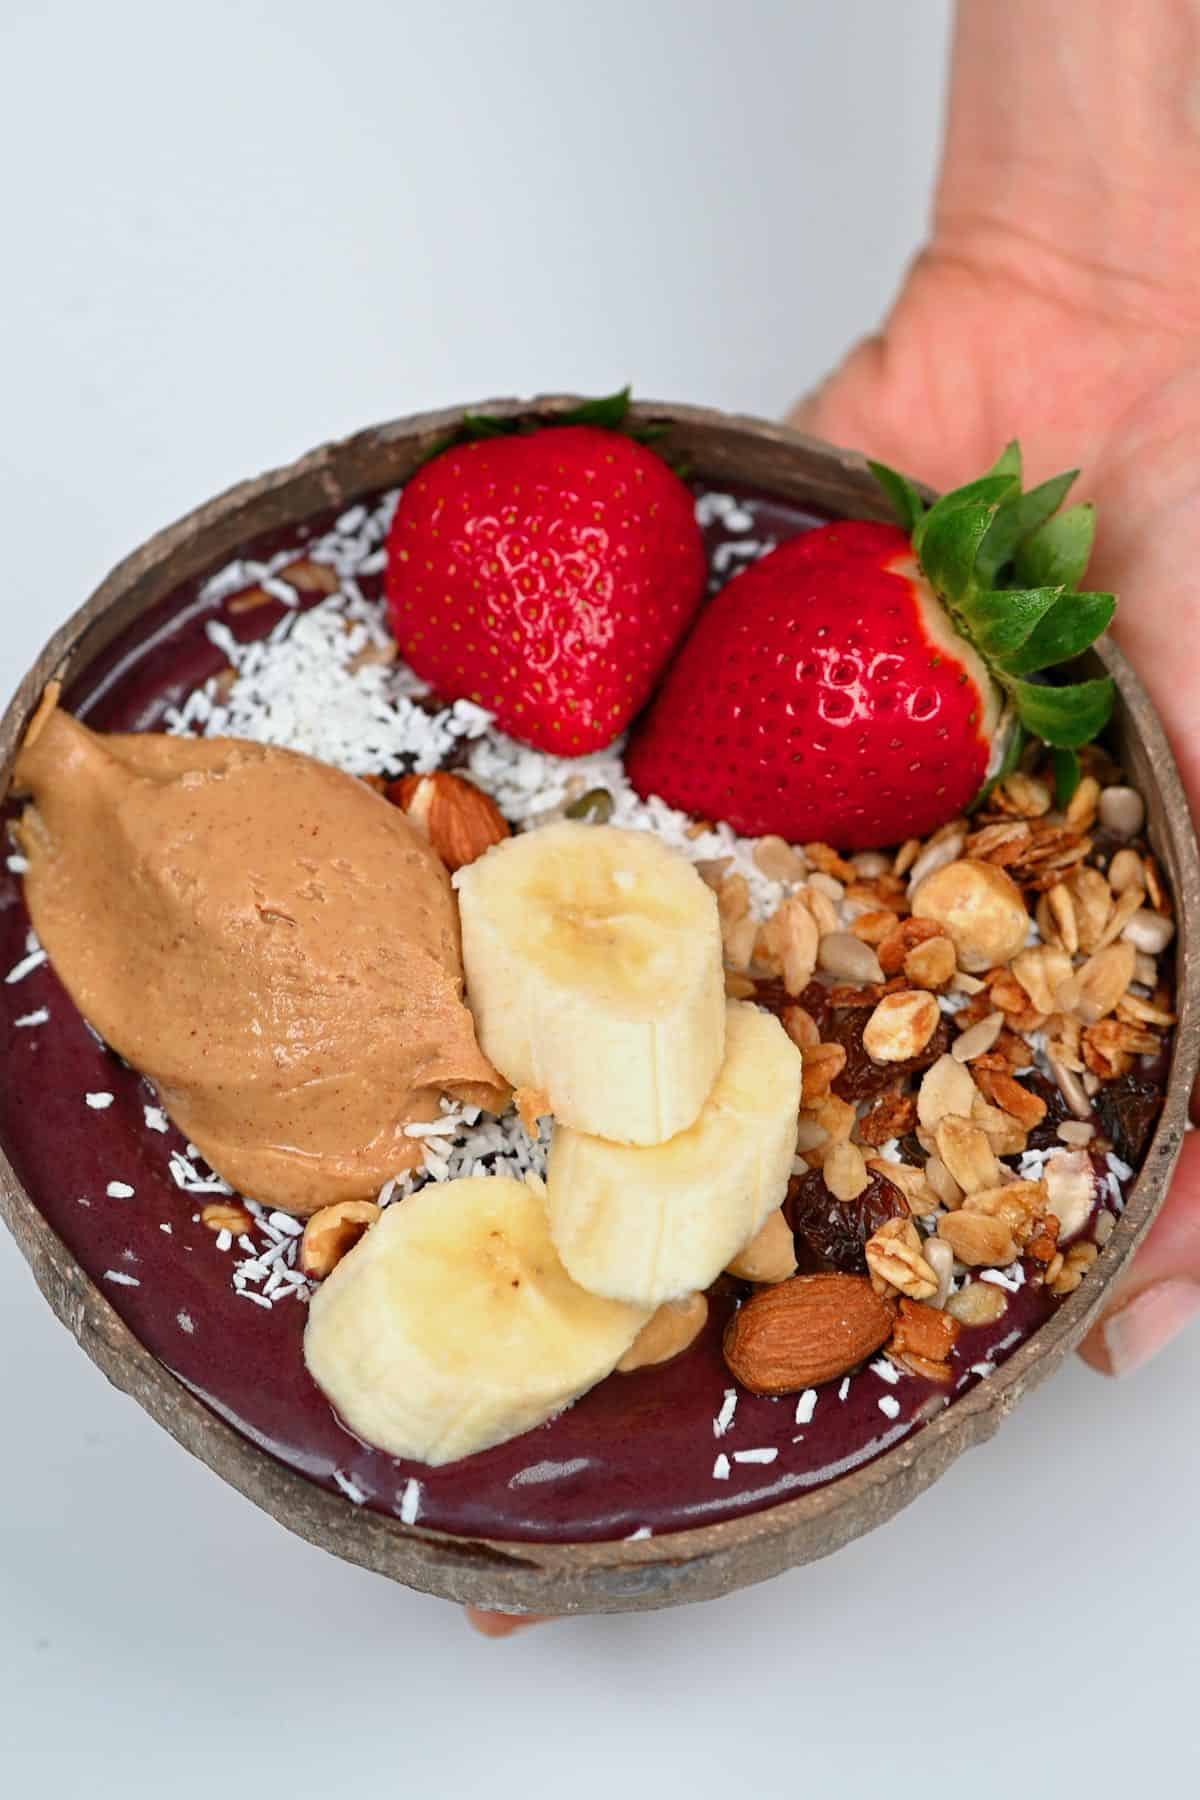 Acai bowl topped with banana and strawberries